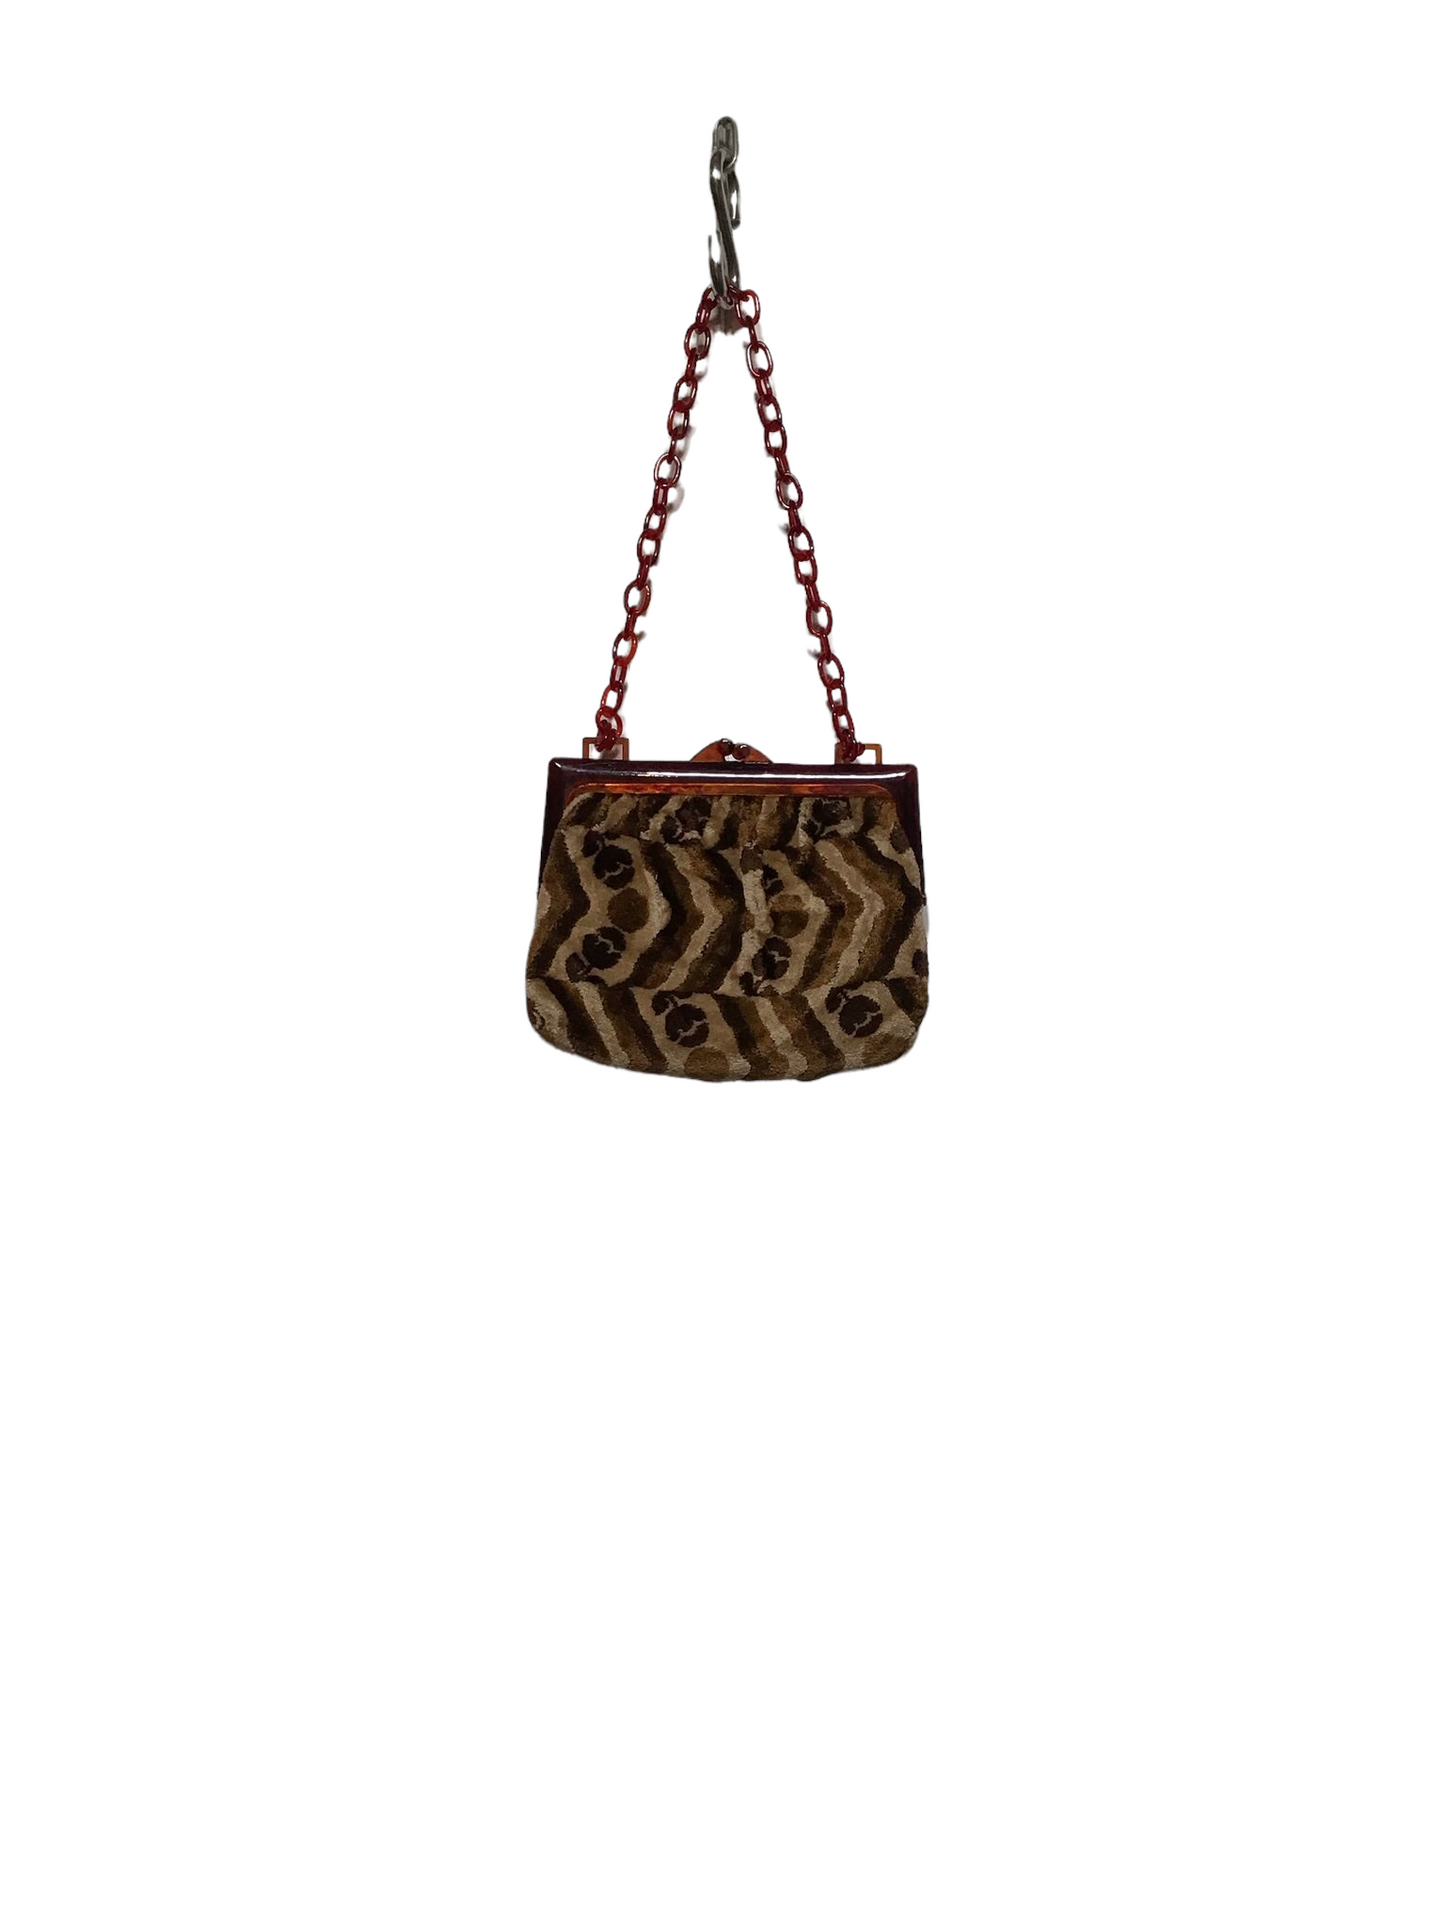 Fabric Bag With Plastic Chain Handle